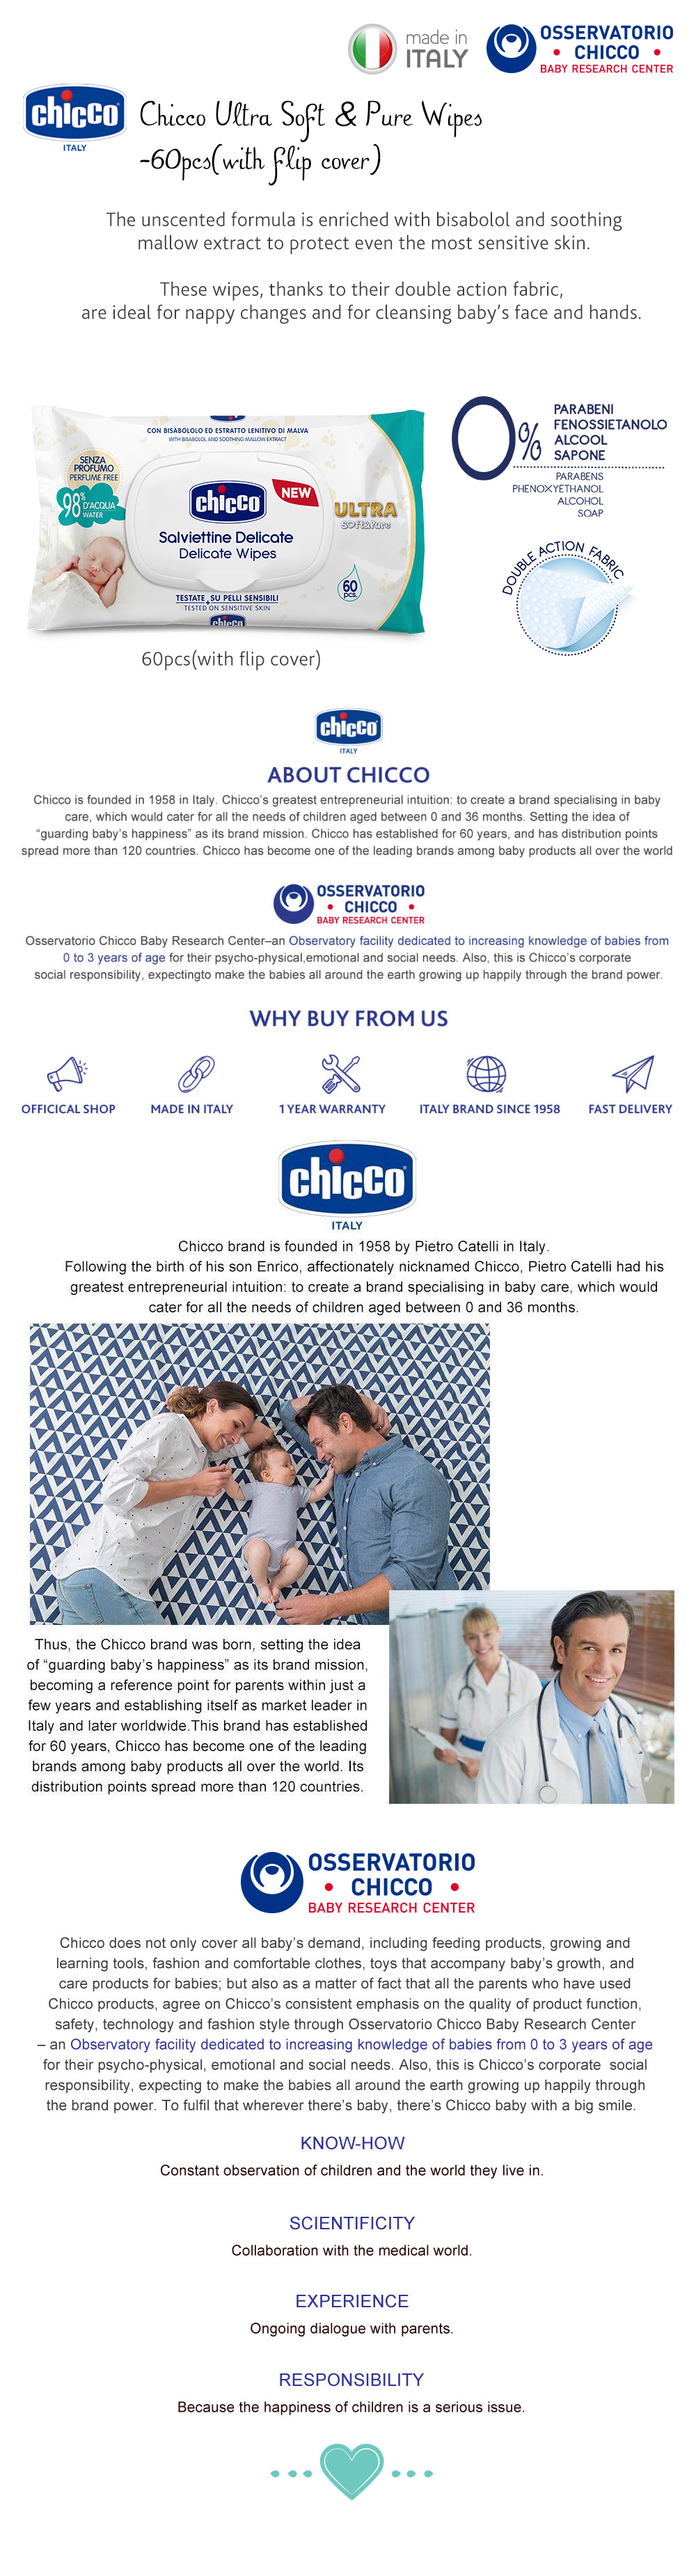 Chicco Ultra Soft & Pure Wipes-60pcs(with flip cover)